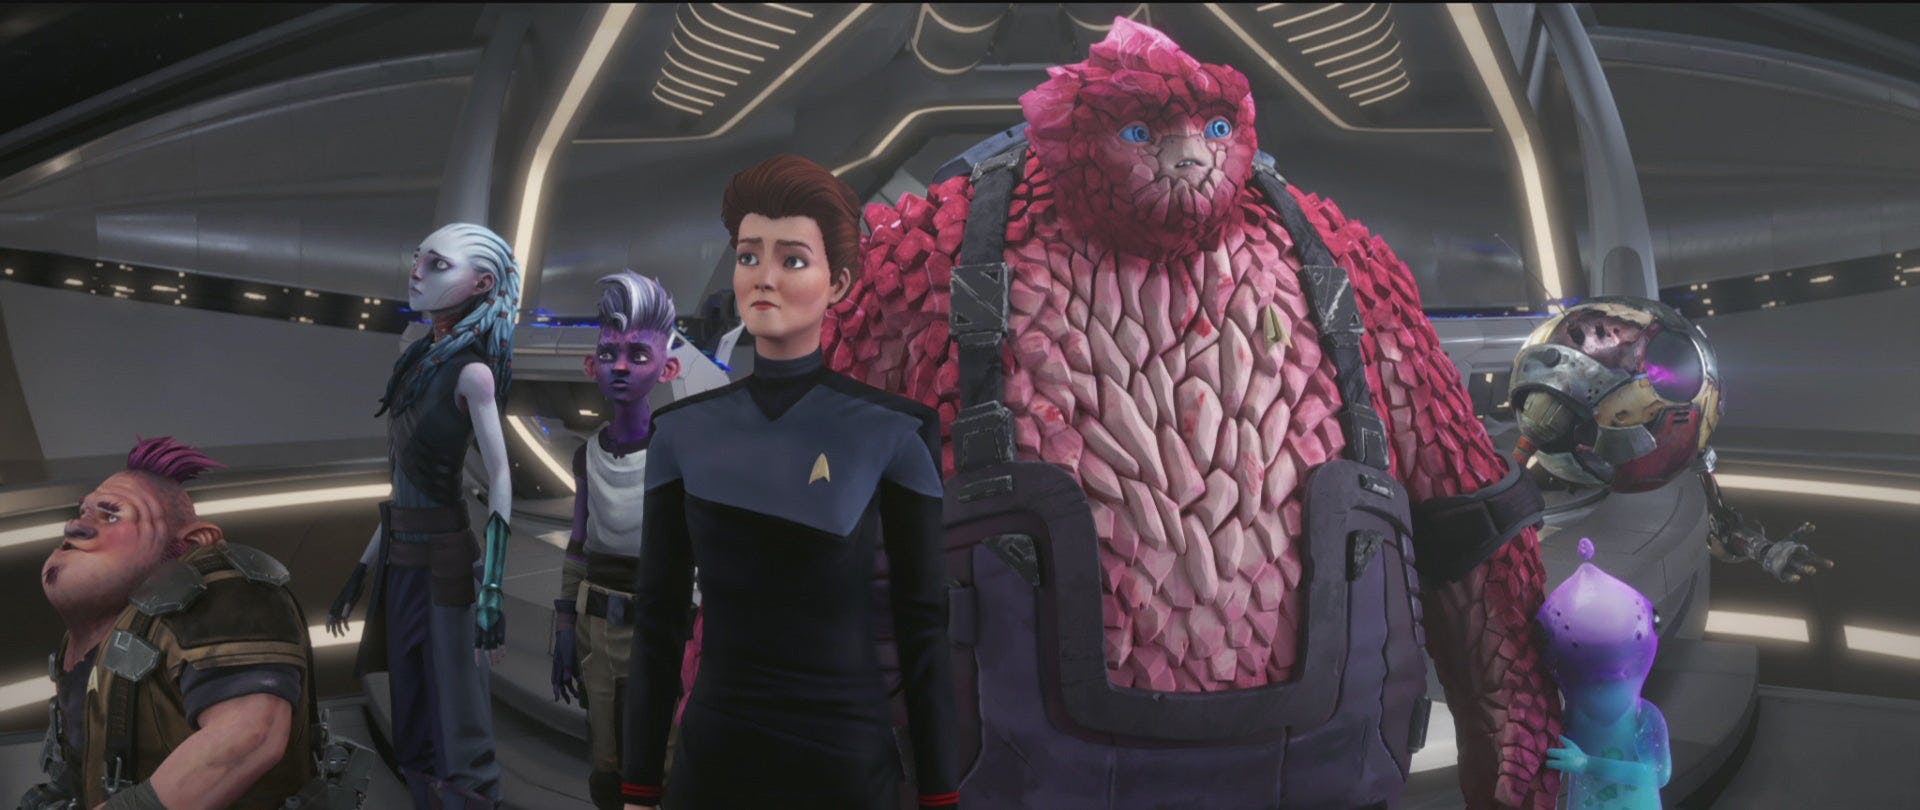 A concerned Protostar crew and Holo-Janeway look out the viewfinder on Star Trek: Prodigy